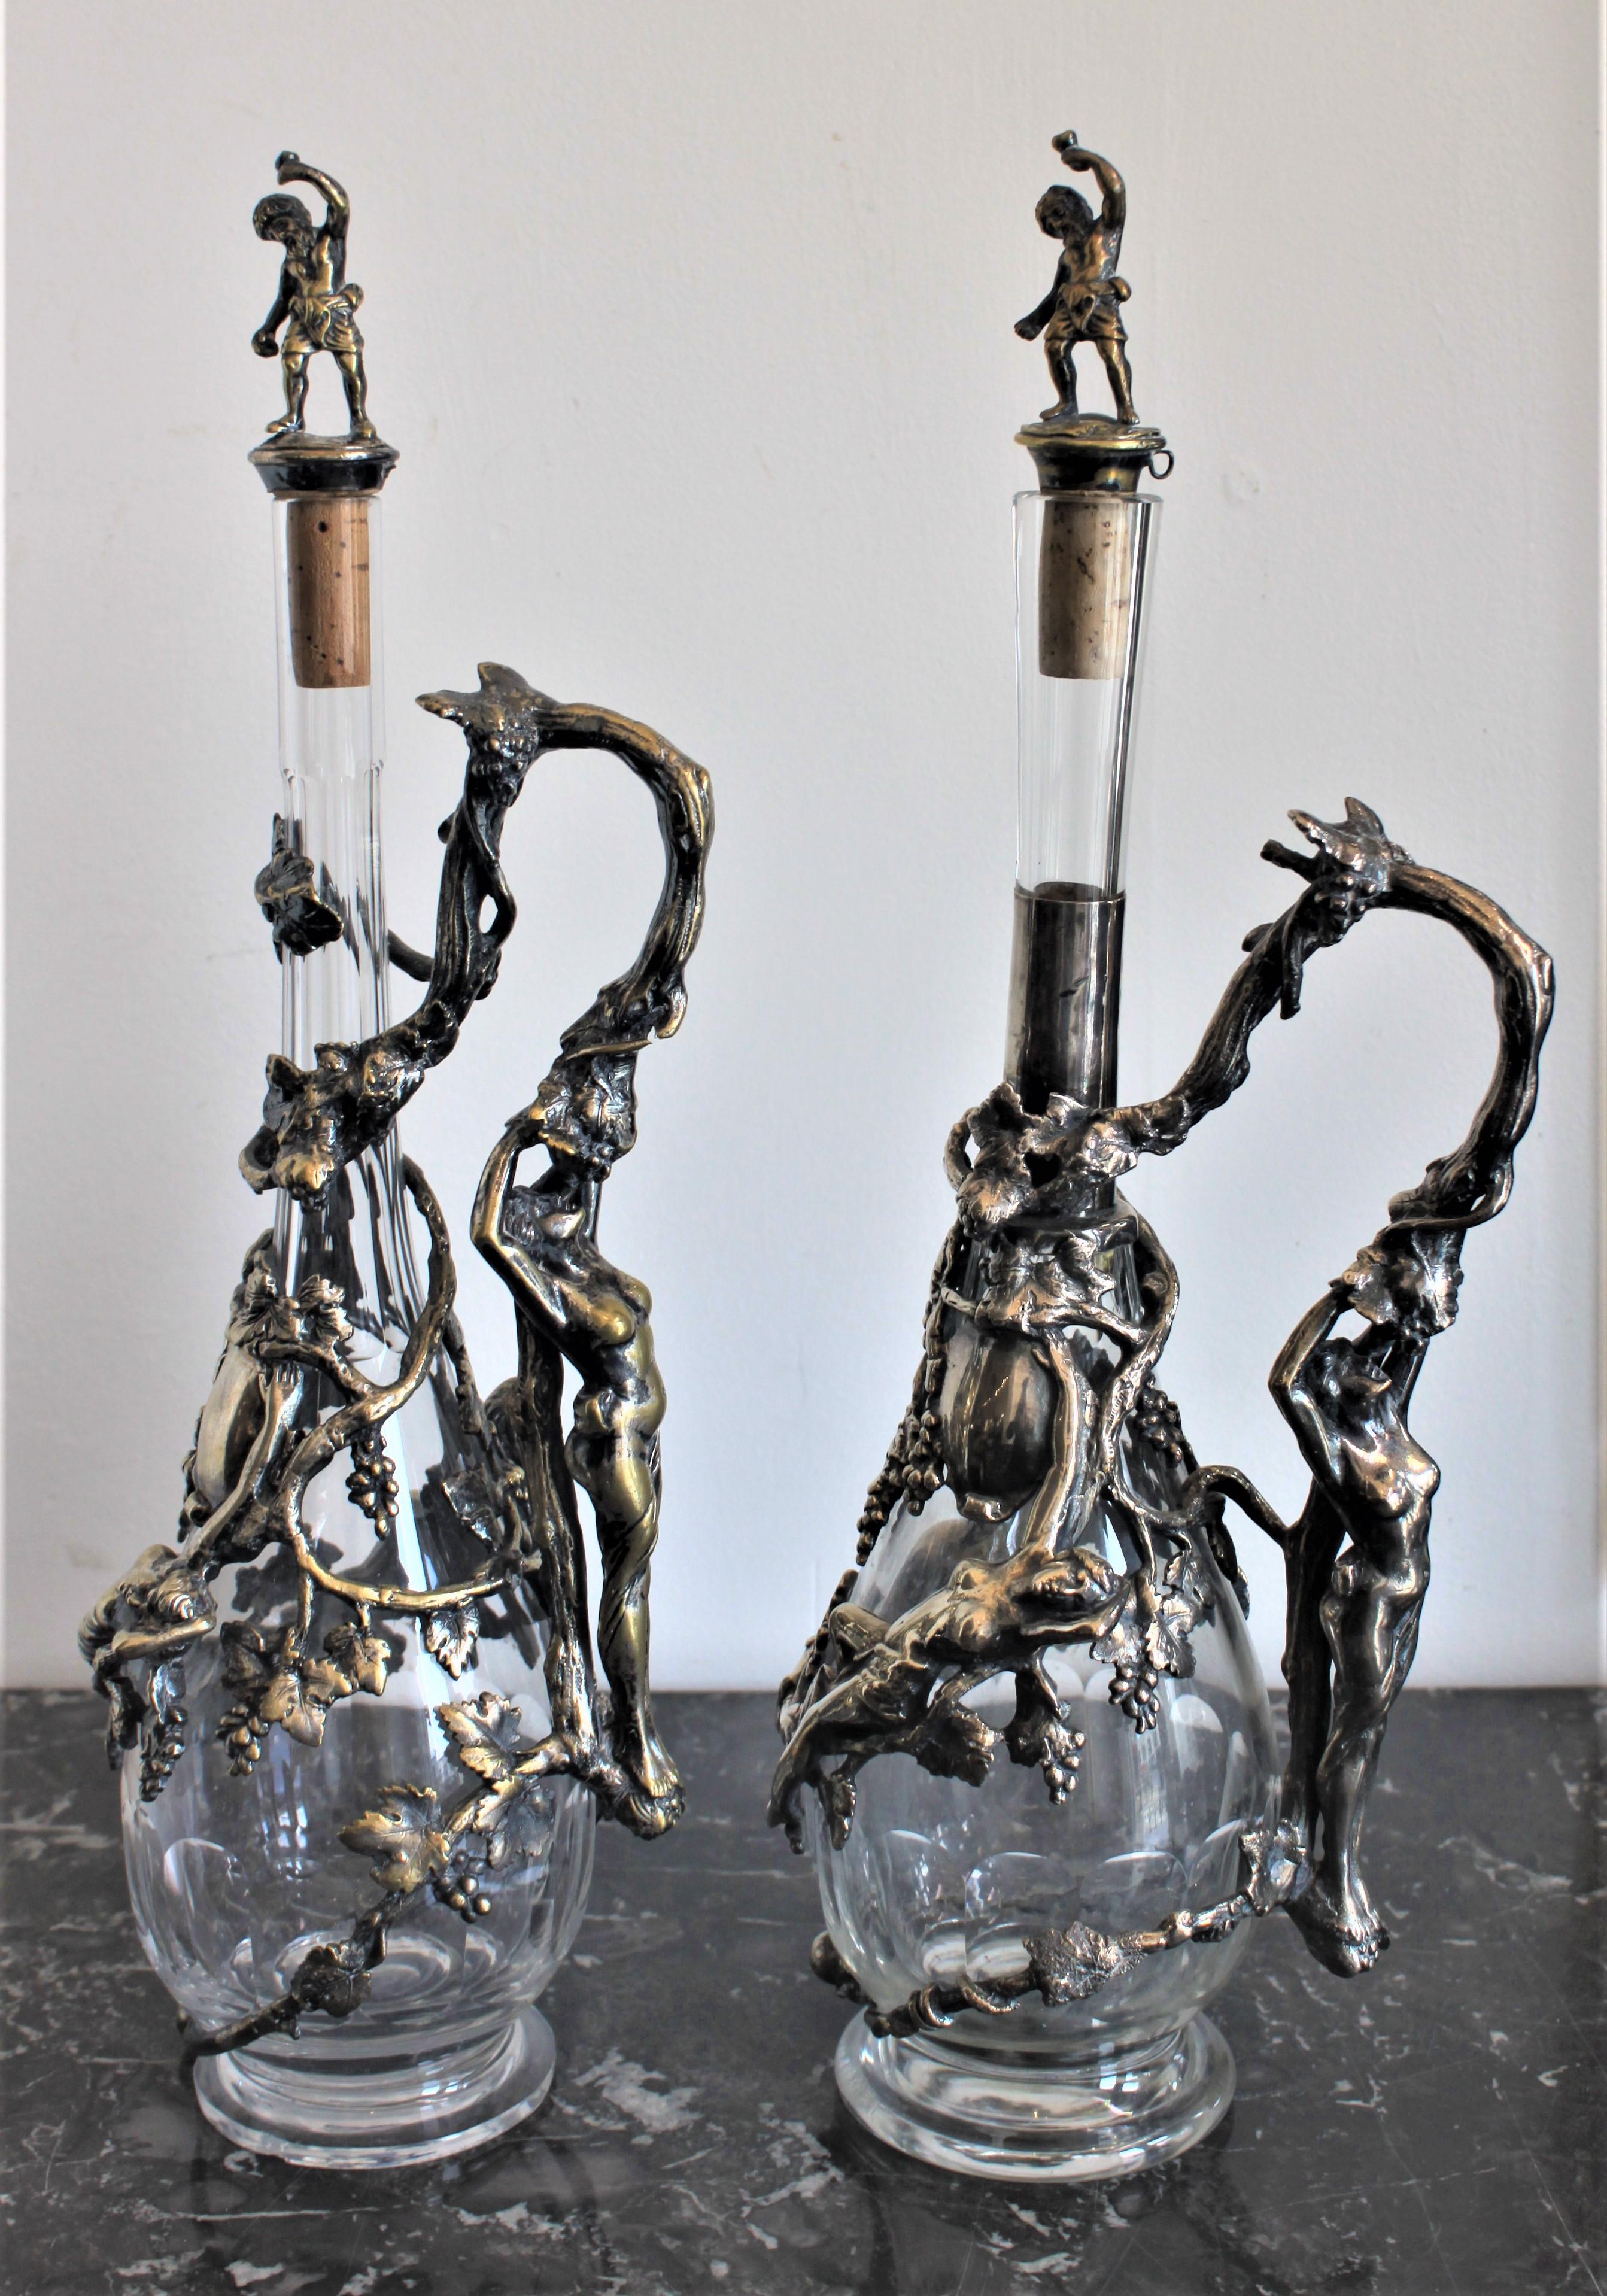 This pair of crystal decanters date from circa 1900 from the Art Nouveau period, and have their origins from Europe, and most likely Austria. The decanters are ornately decorated with figural grape vines done in silver plate with two figural nude